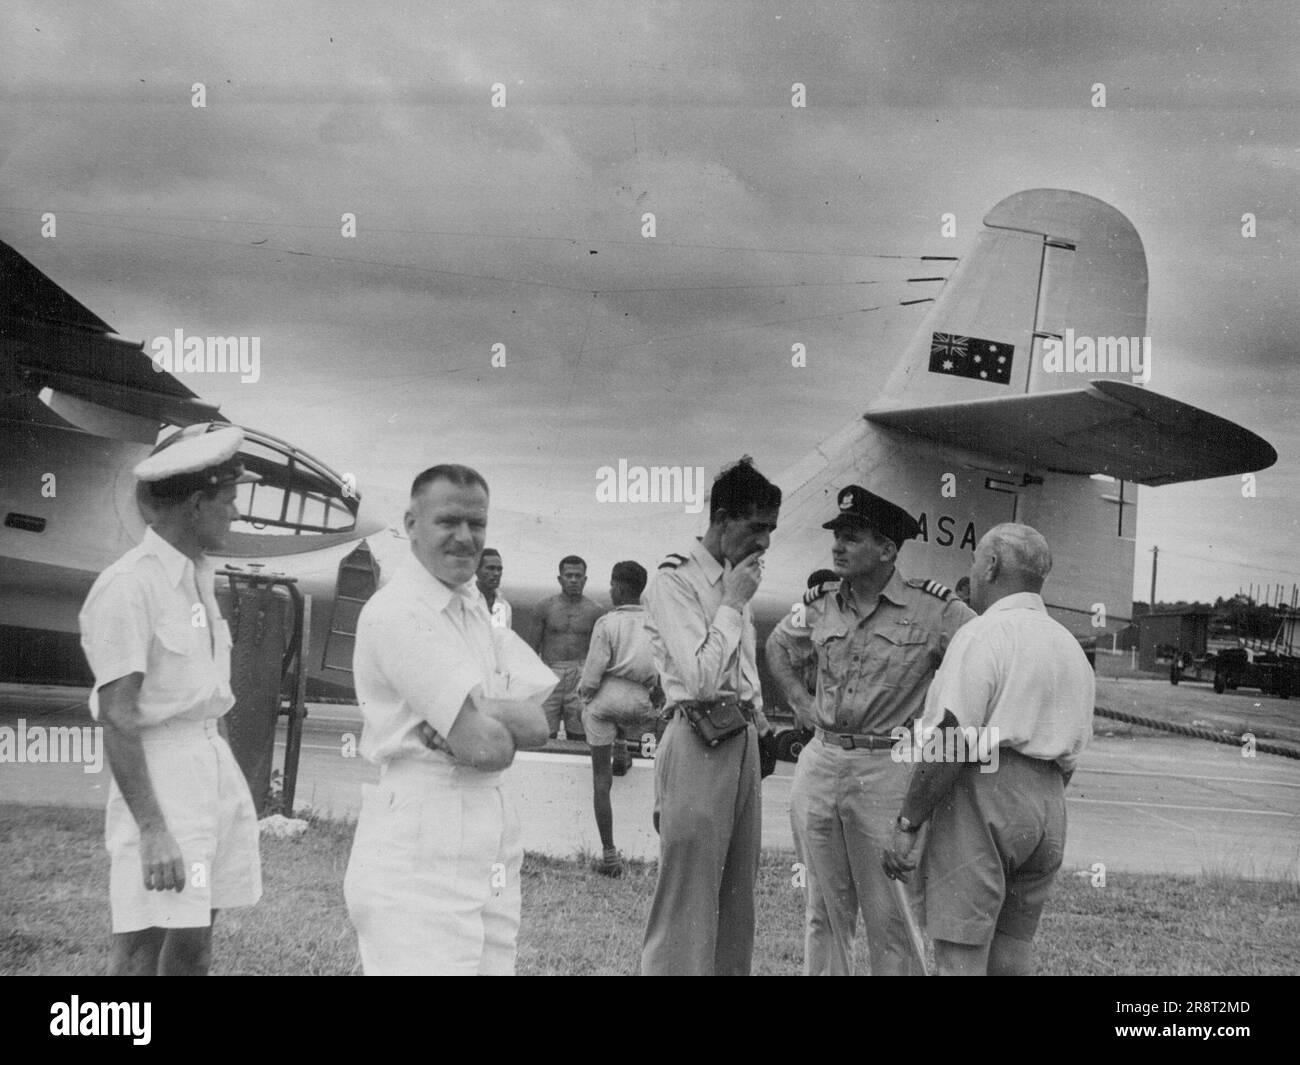 Captain P.G. Taylor's Survey Flight to Chile Laucala Bay Airport, Suva, before take off Apia, 17th March 1951. G. Edwards, Fiji Customs, Bert Henry, Senior Mail Clerk, J. Percival, Executive Officer, Capt. H. Purvis, First Officer, A. Wills engineer representing one of the oil companies. January 01, 1951. Stock Photo